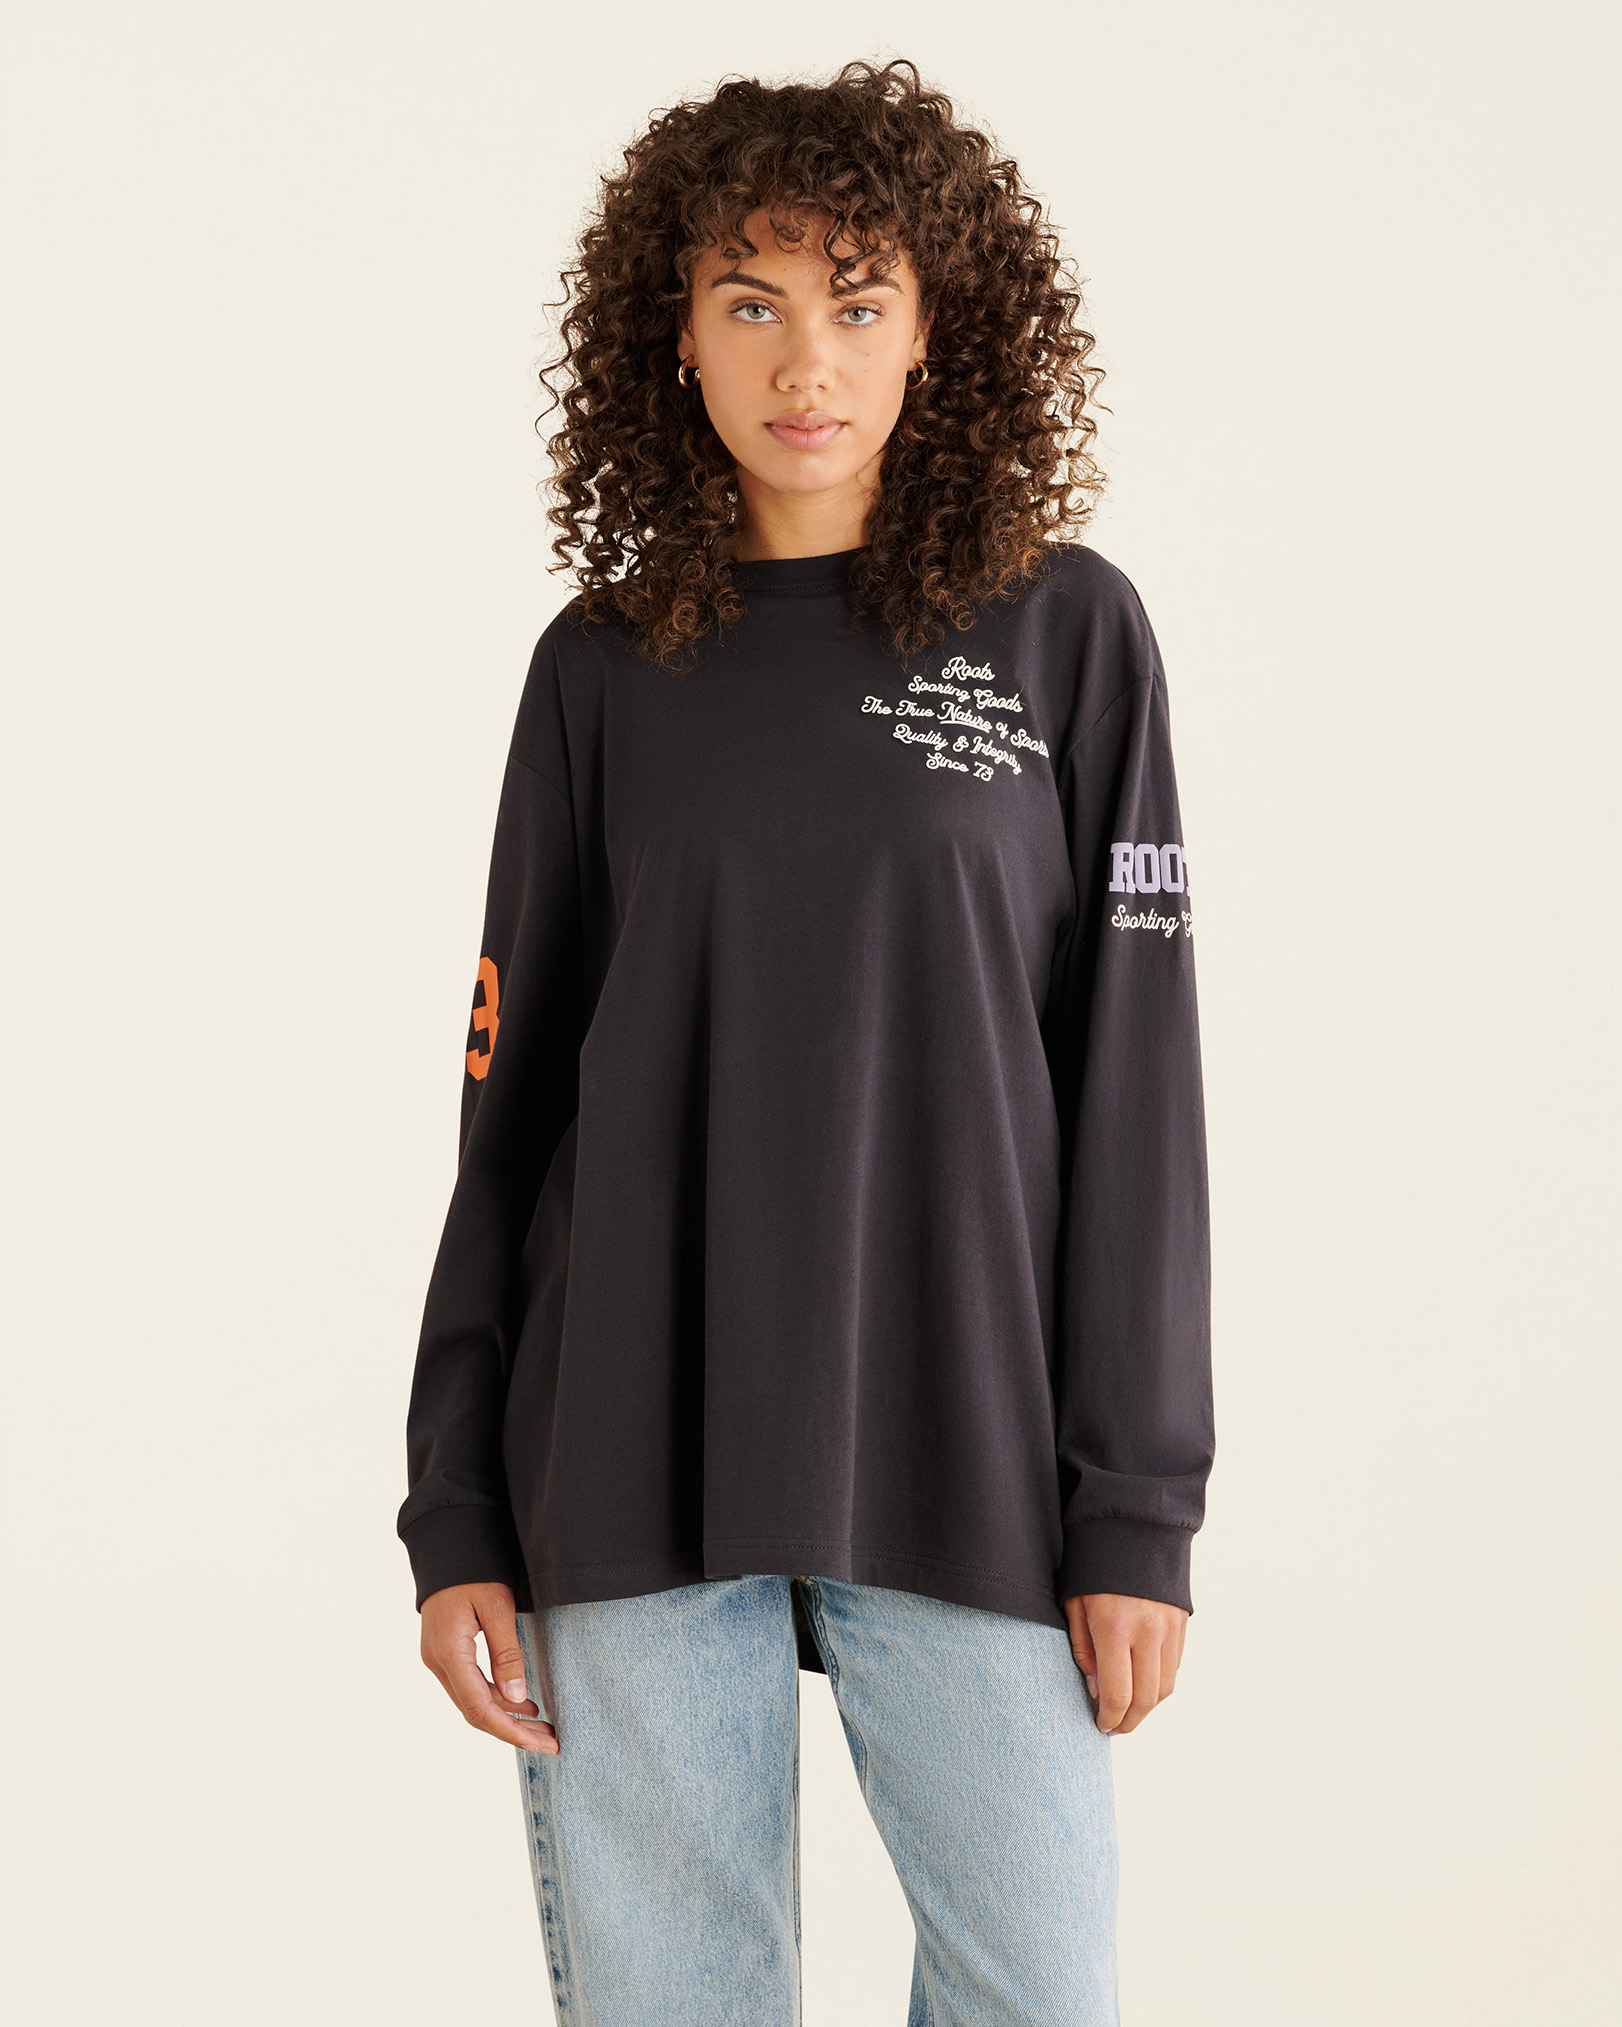 Roots Women's Sporting Goods Long Sleeve T-Shirt in Graphite